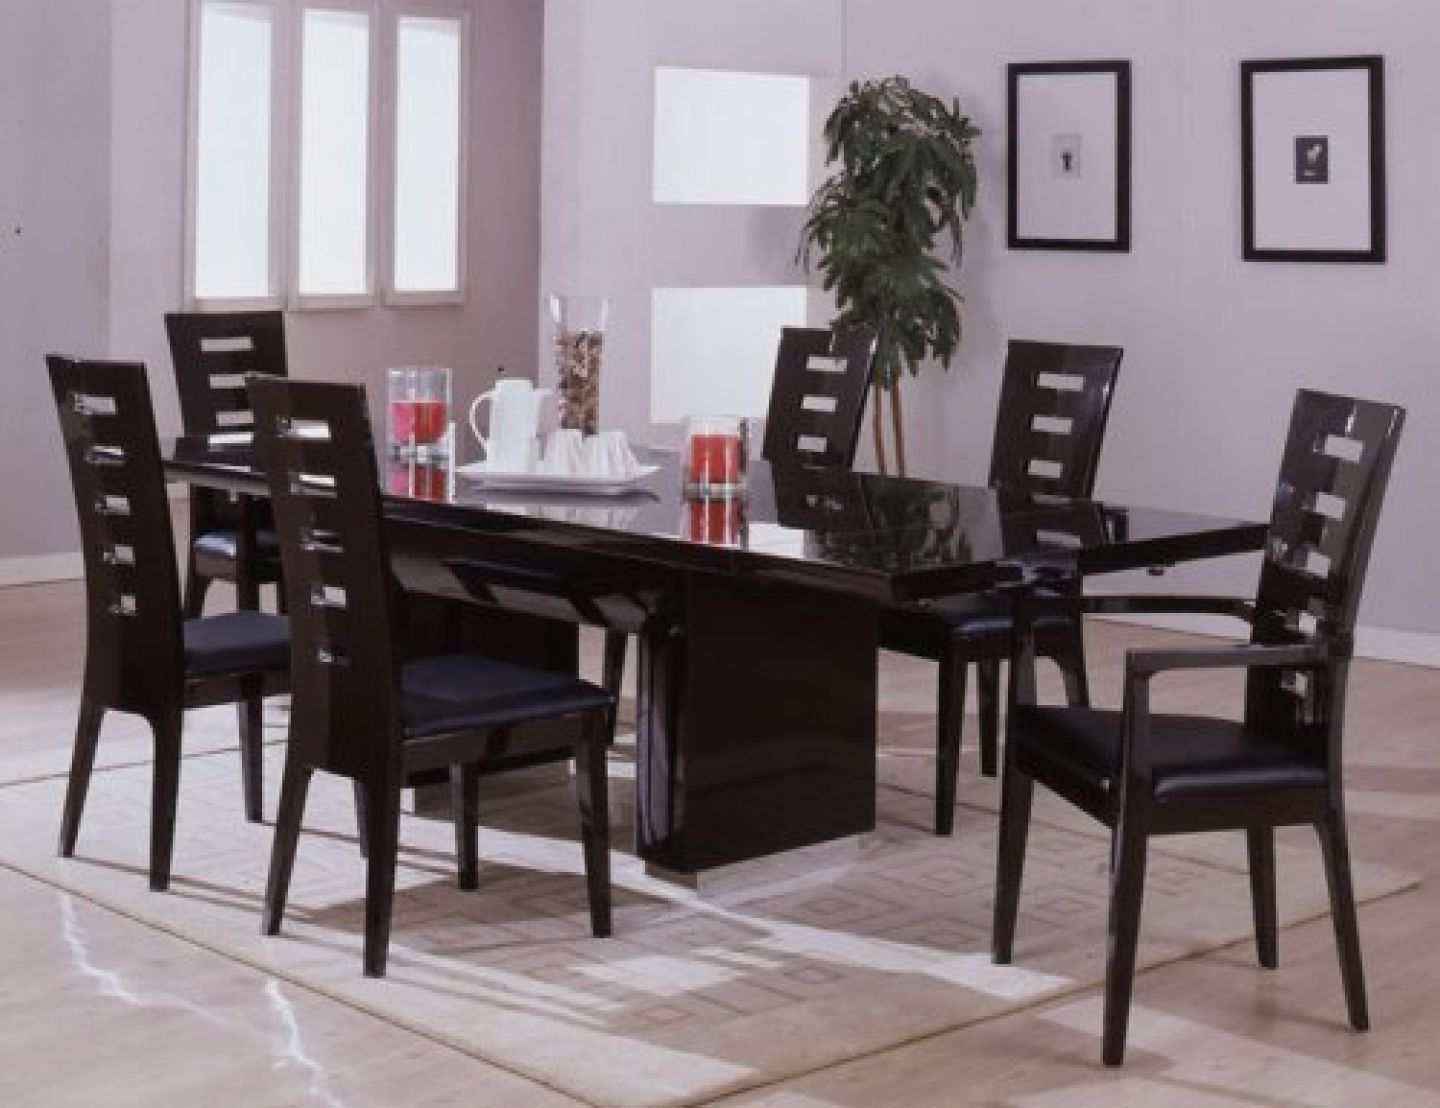 Dark Color Dining Simple Dark Color For Modern Dining Room Chairs Around Long Black Table On Grey Carpet Dining Room Modern Dining Room Chairs Chosen For Stylish And Open Dining Area